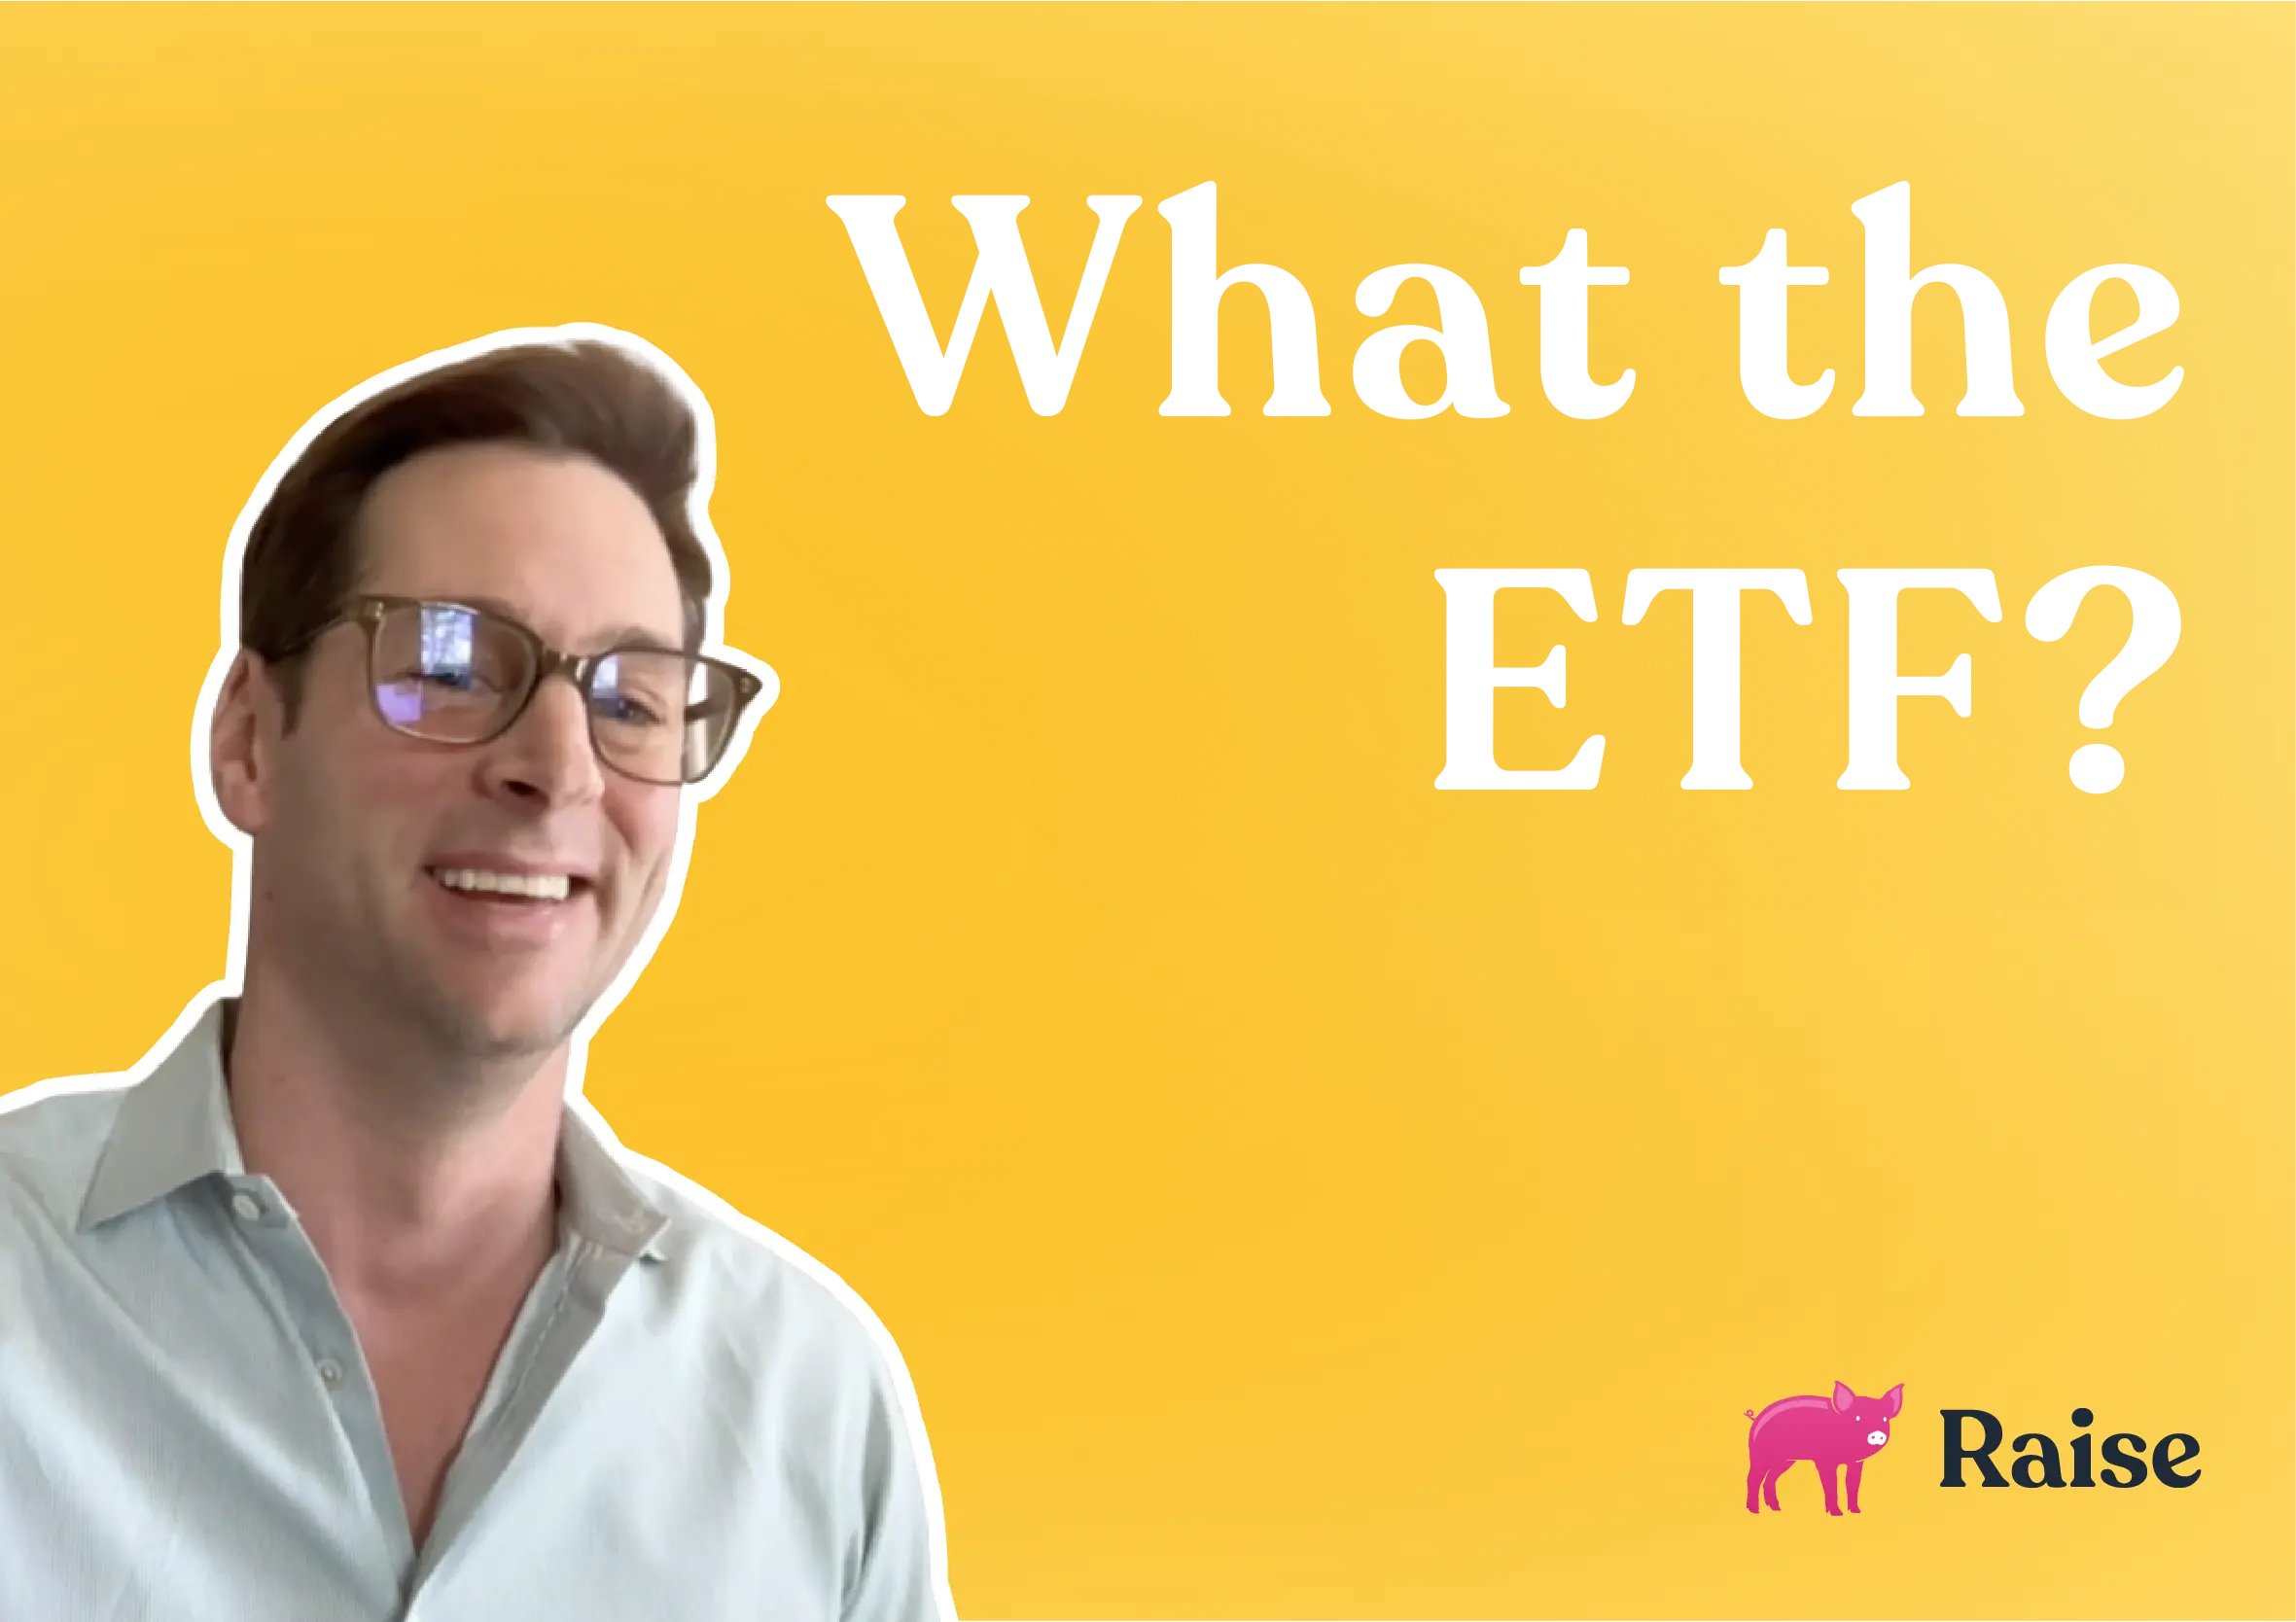 What the ETF?